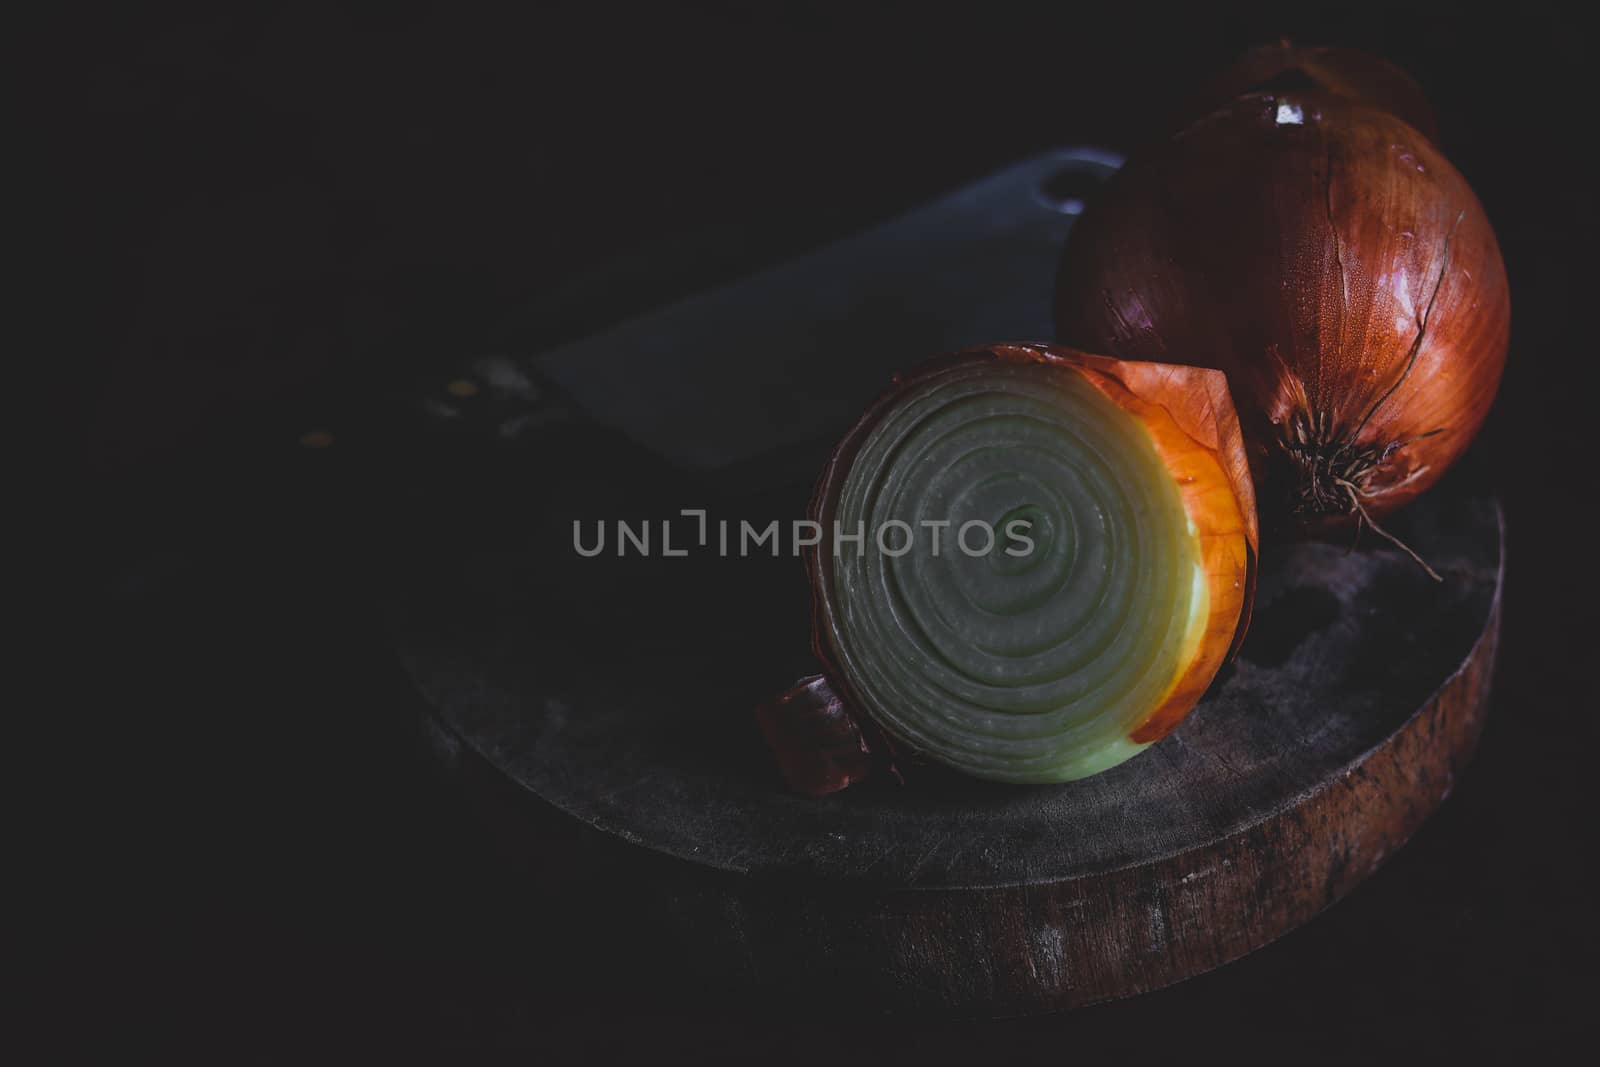 Bulbs of Onions shot in low light dark and moody theme to show concept of gastronomy, clean living and healthy diet